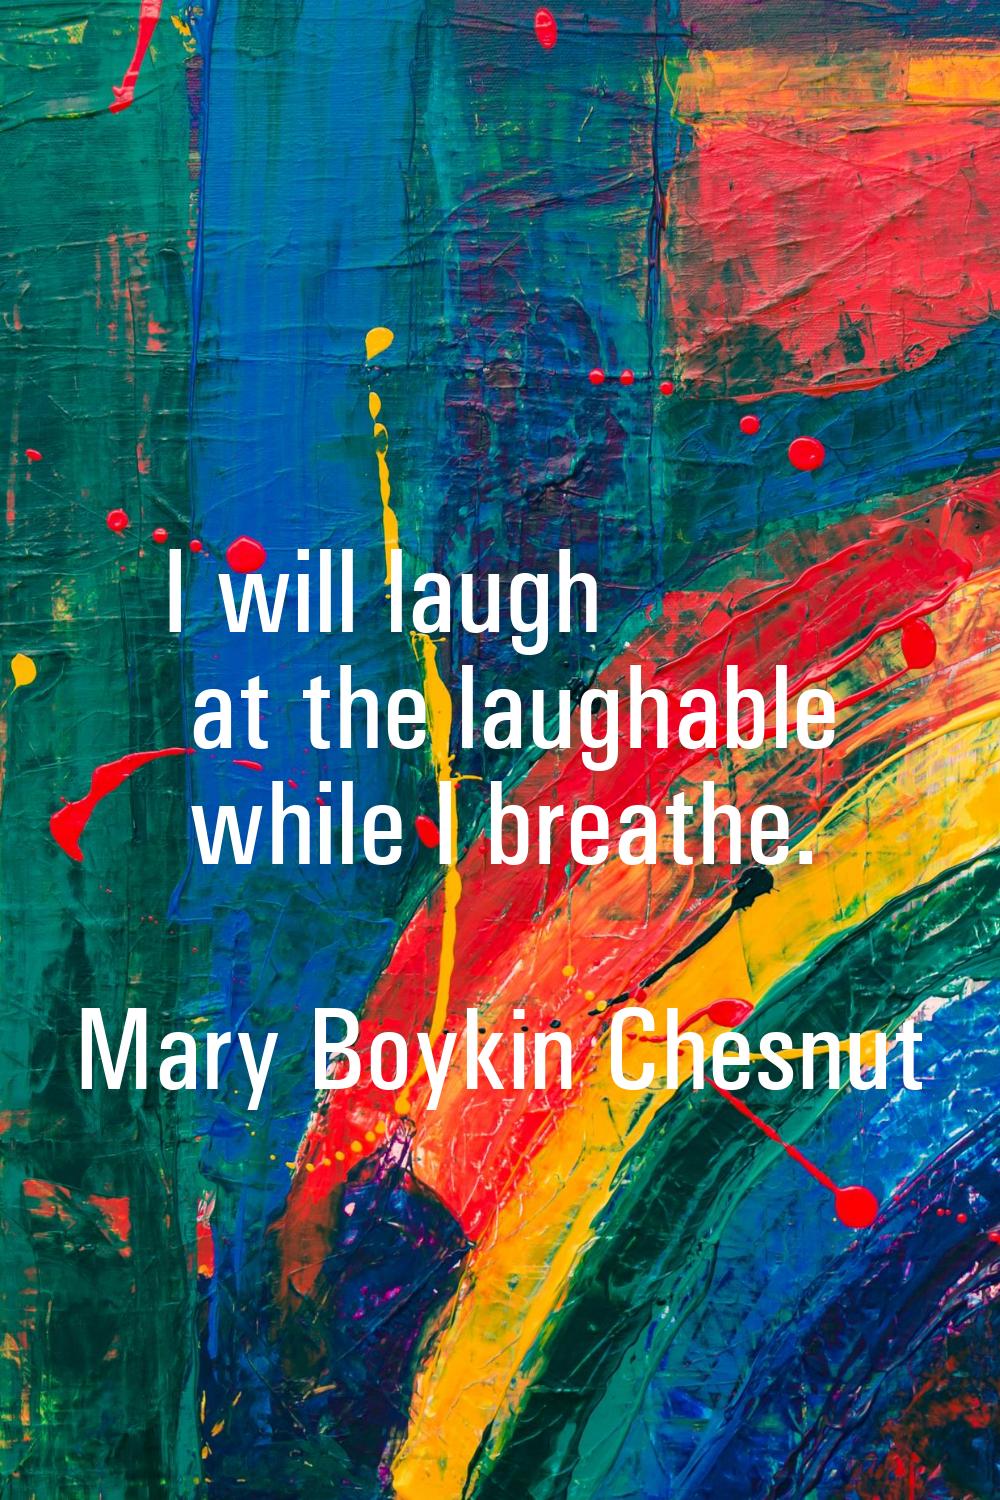 I will laugh at the laughable while I breathe.